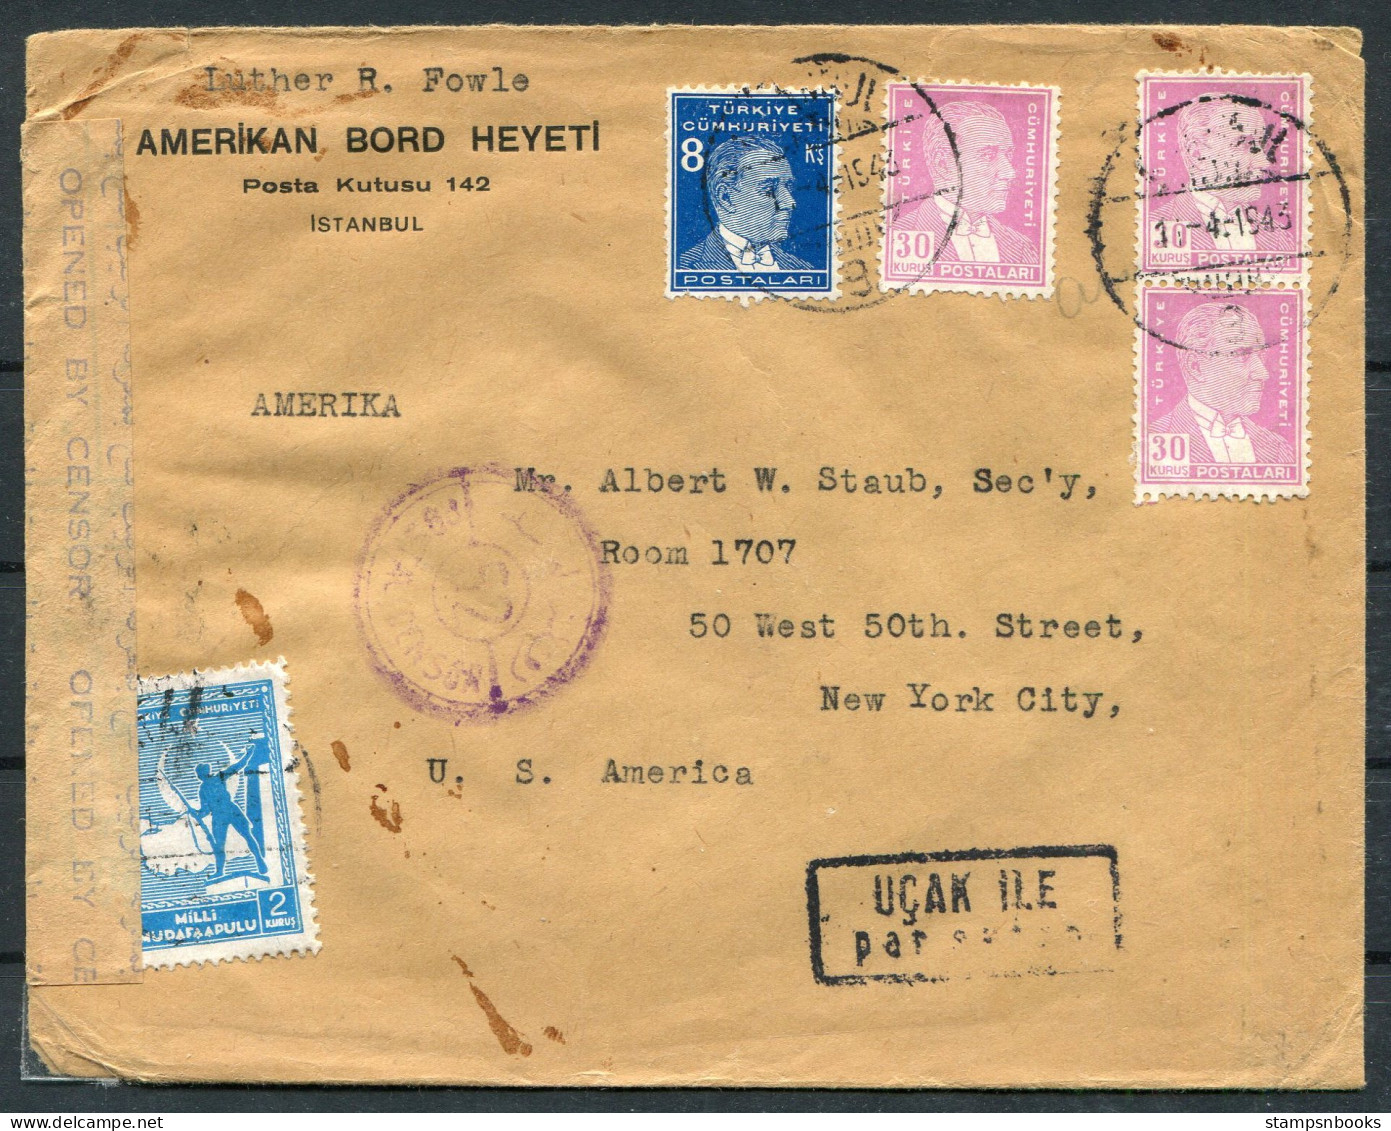 1943 Turkey Airmail Cover, Luther R Fowle, Amerikan Bord Heyeti Istanbul Mission Censor Cover - New York, USA - Lettres & Documents